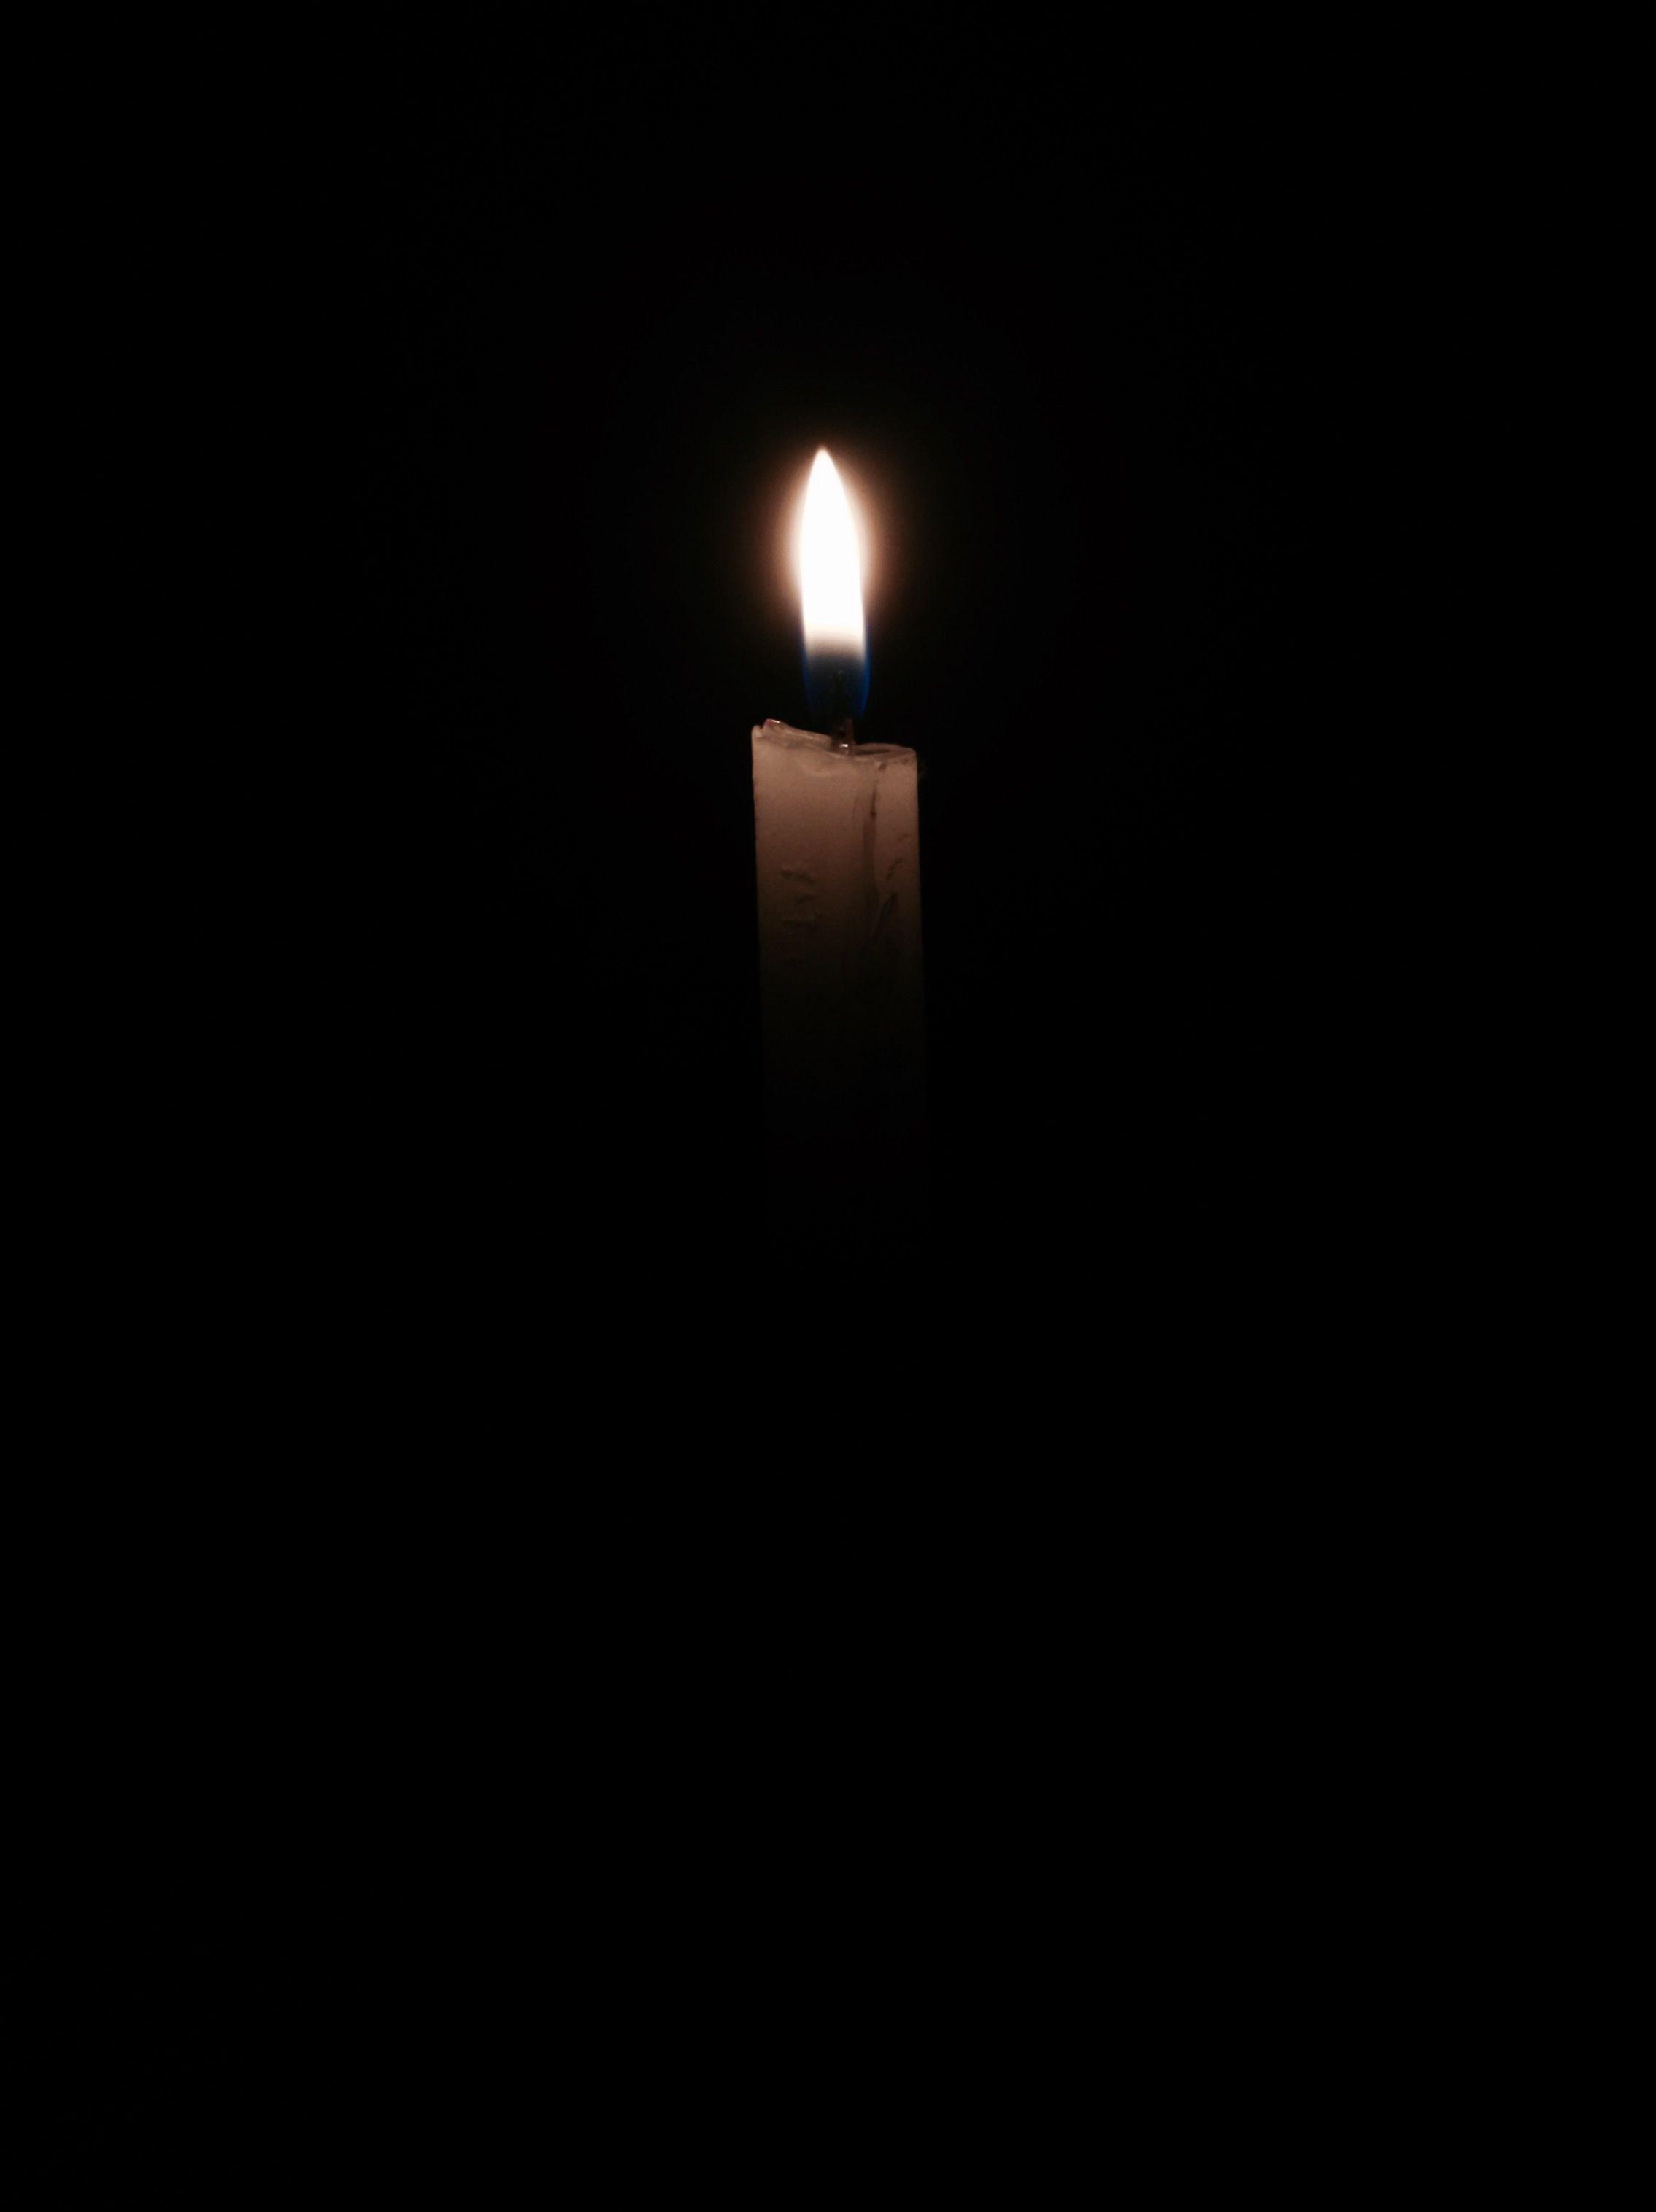 Black Candle Wallpapers - Wallpaper Cave